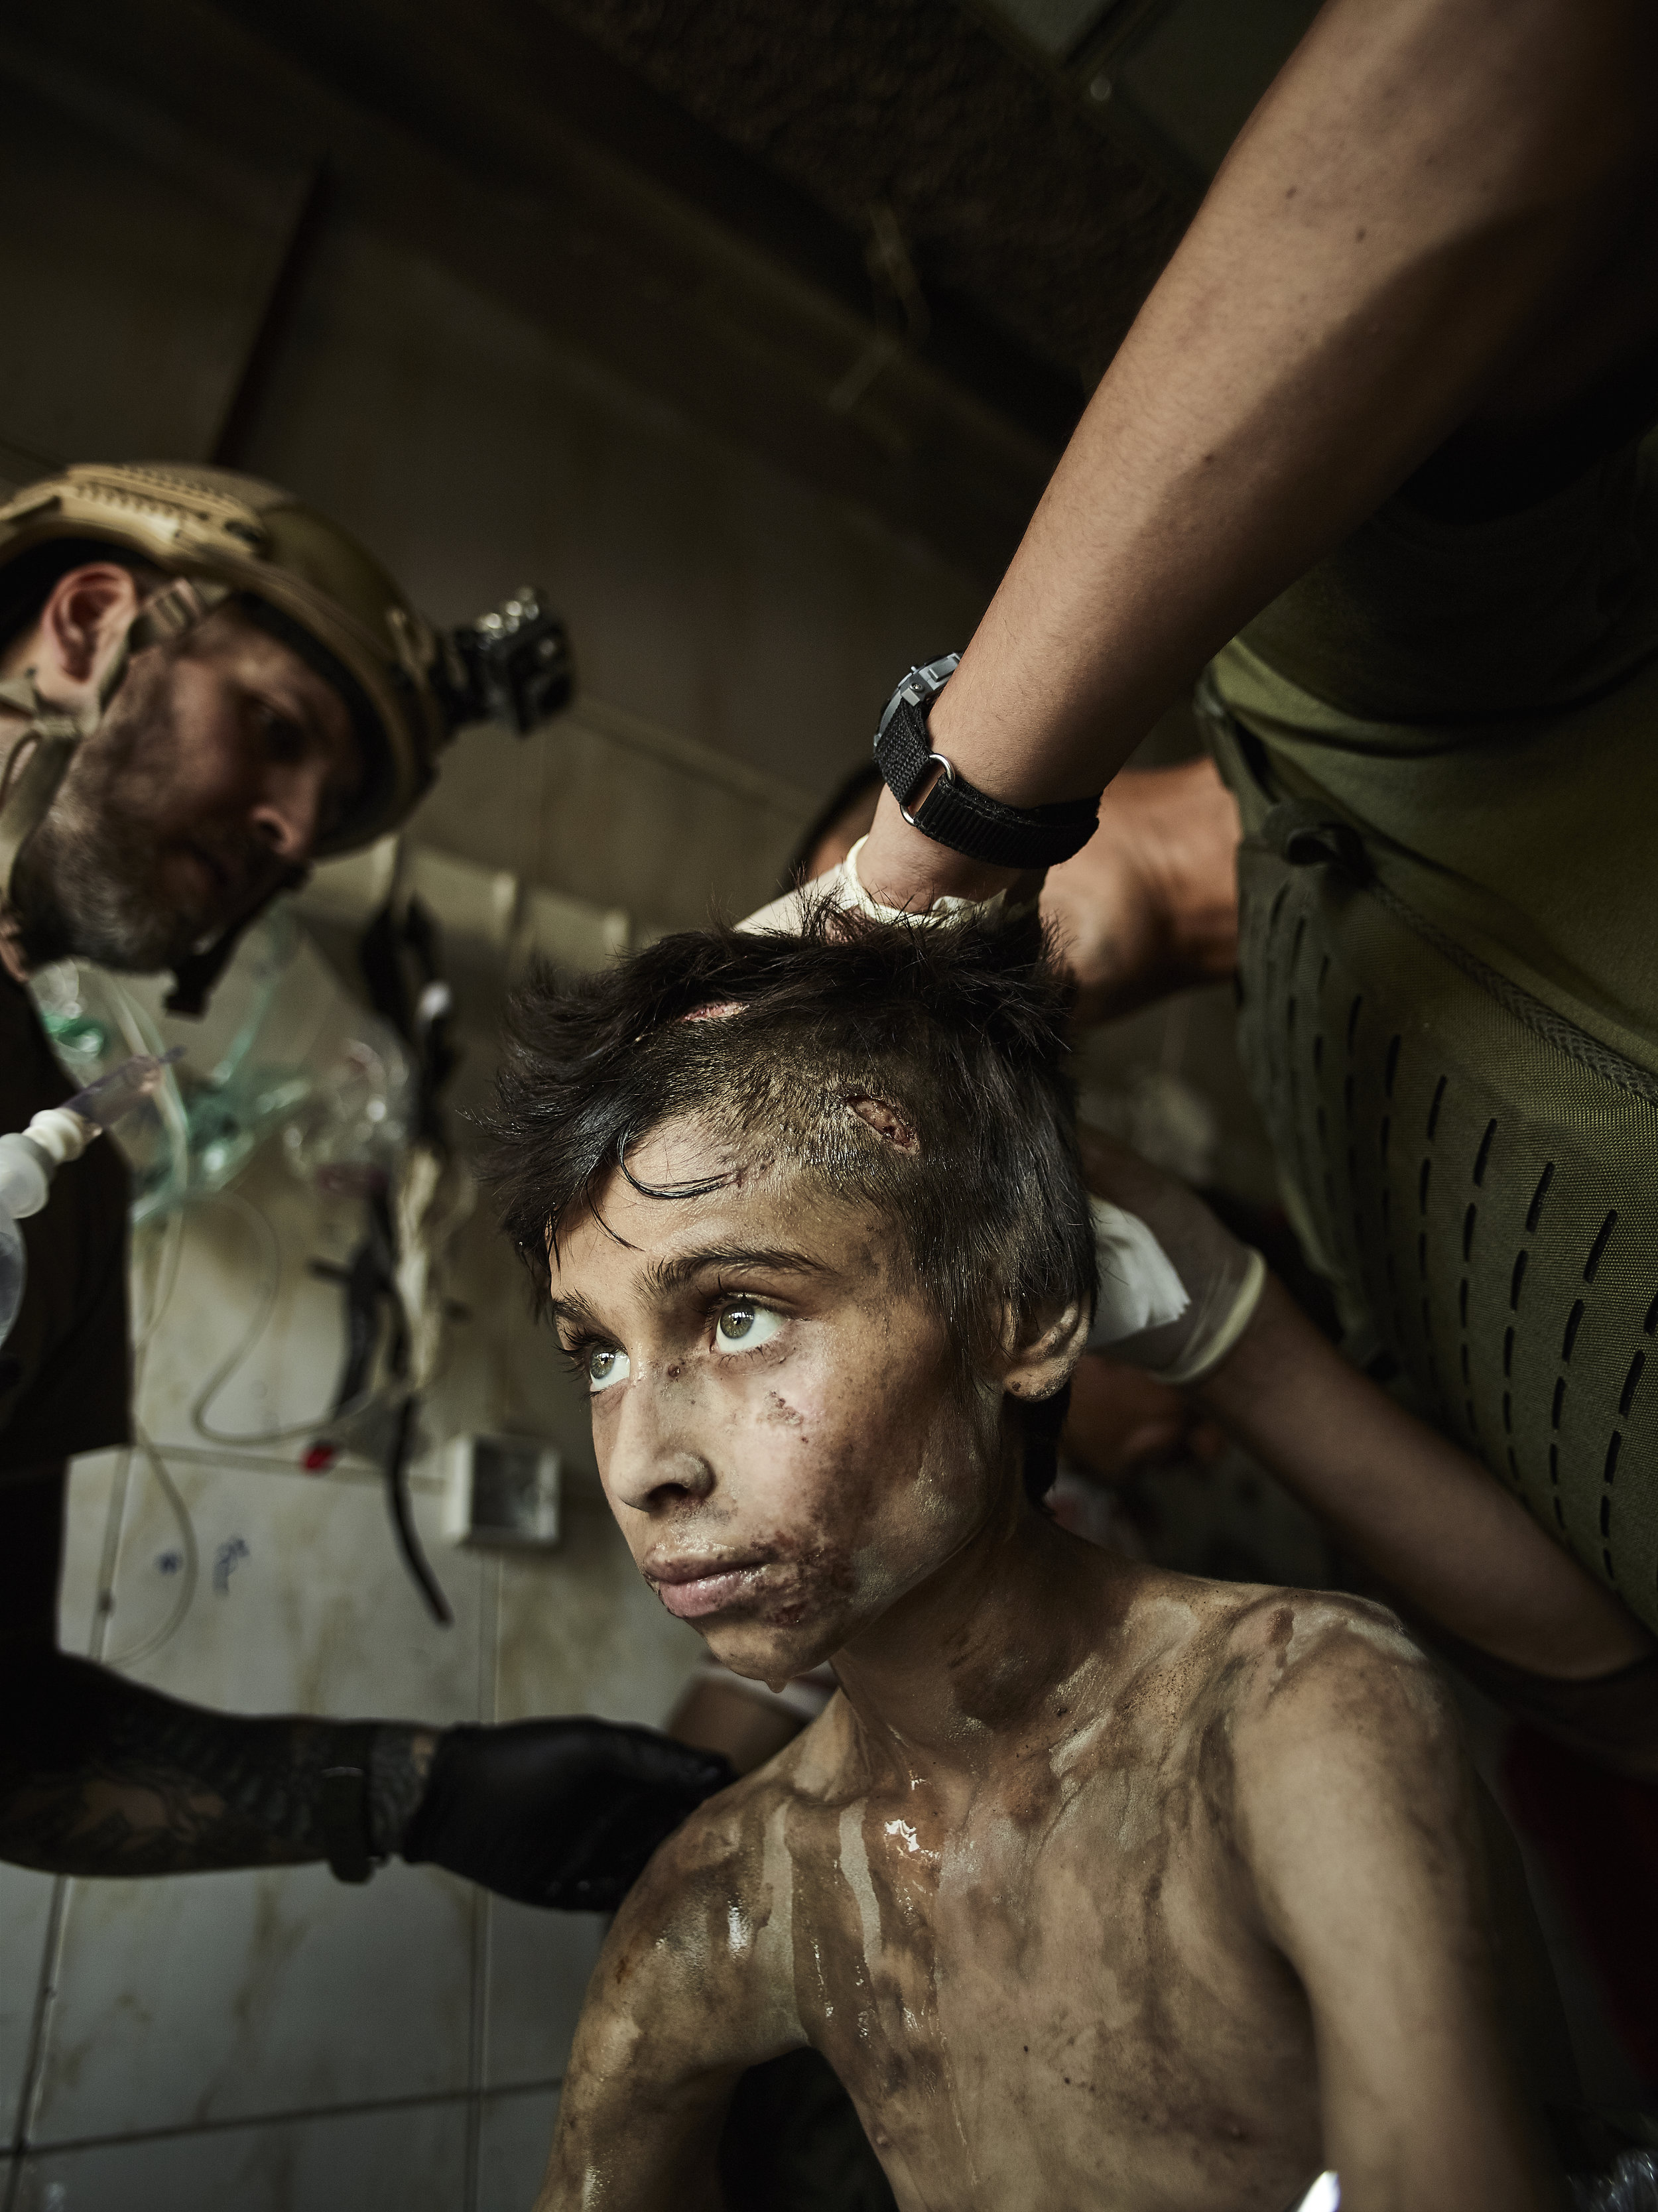 Tomas, a Yazidi boy who was kidnapped by ISIS, is given medical care in a field hospital, West Mosul